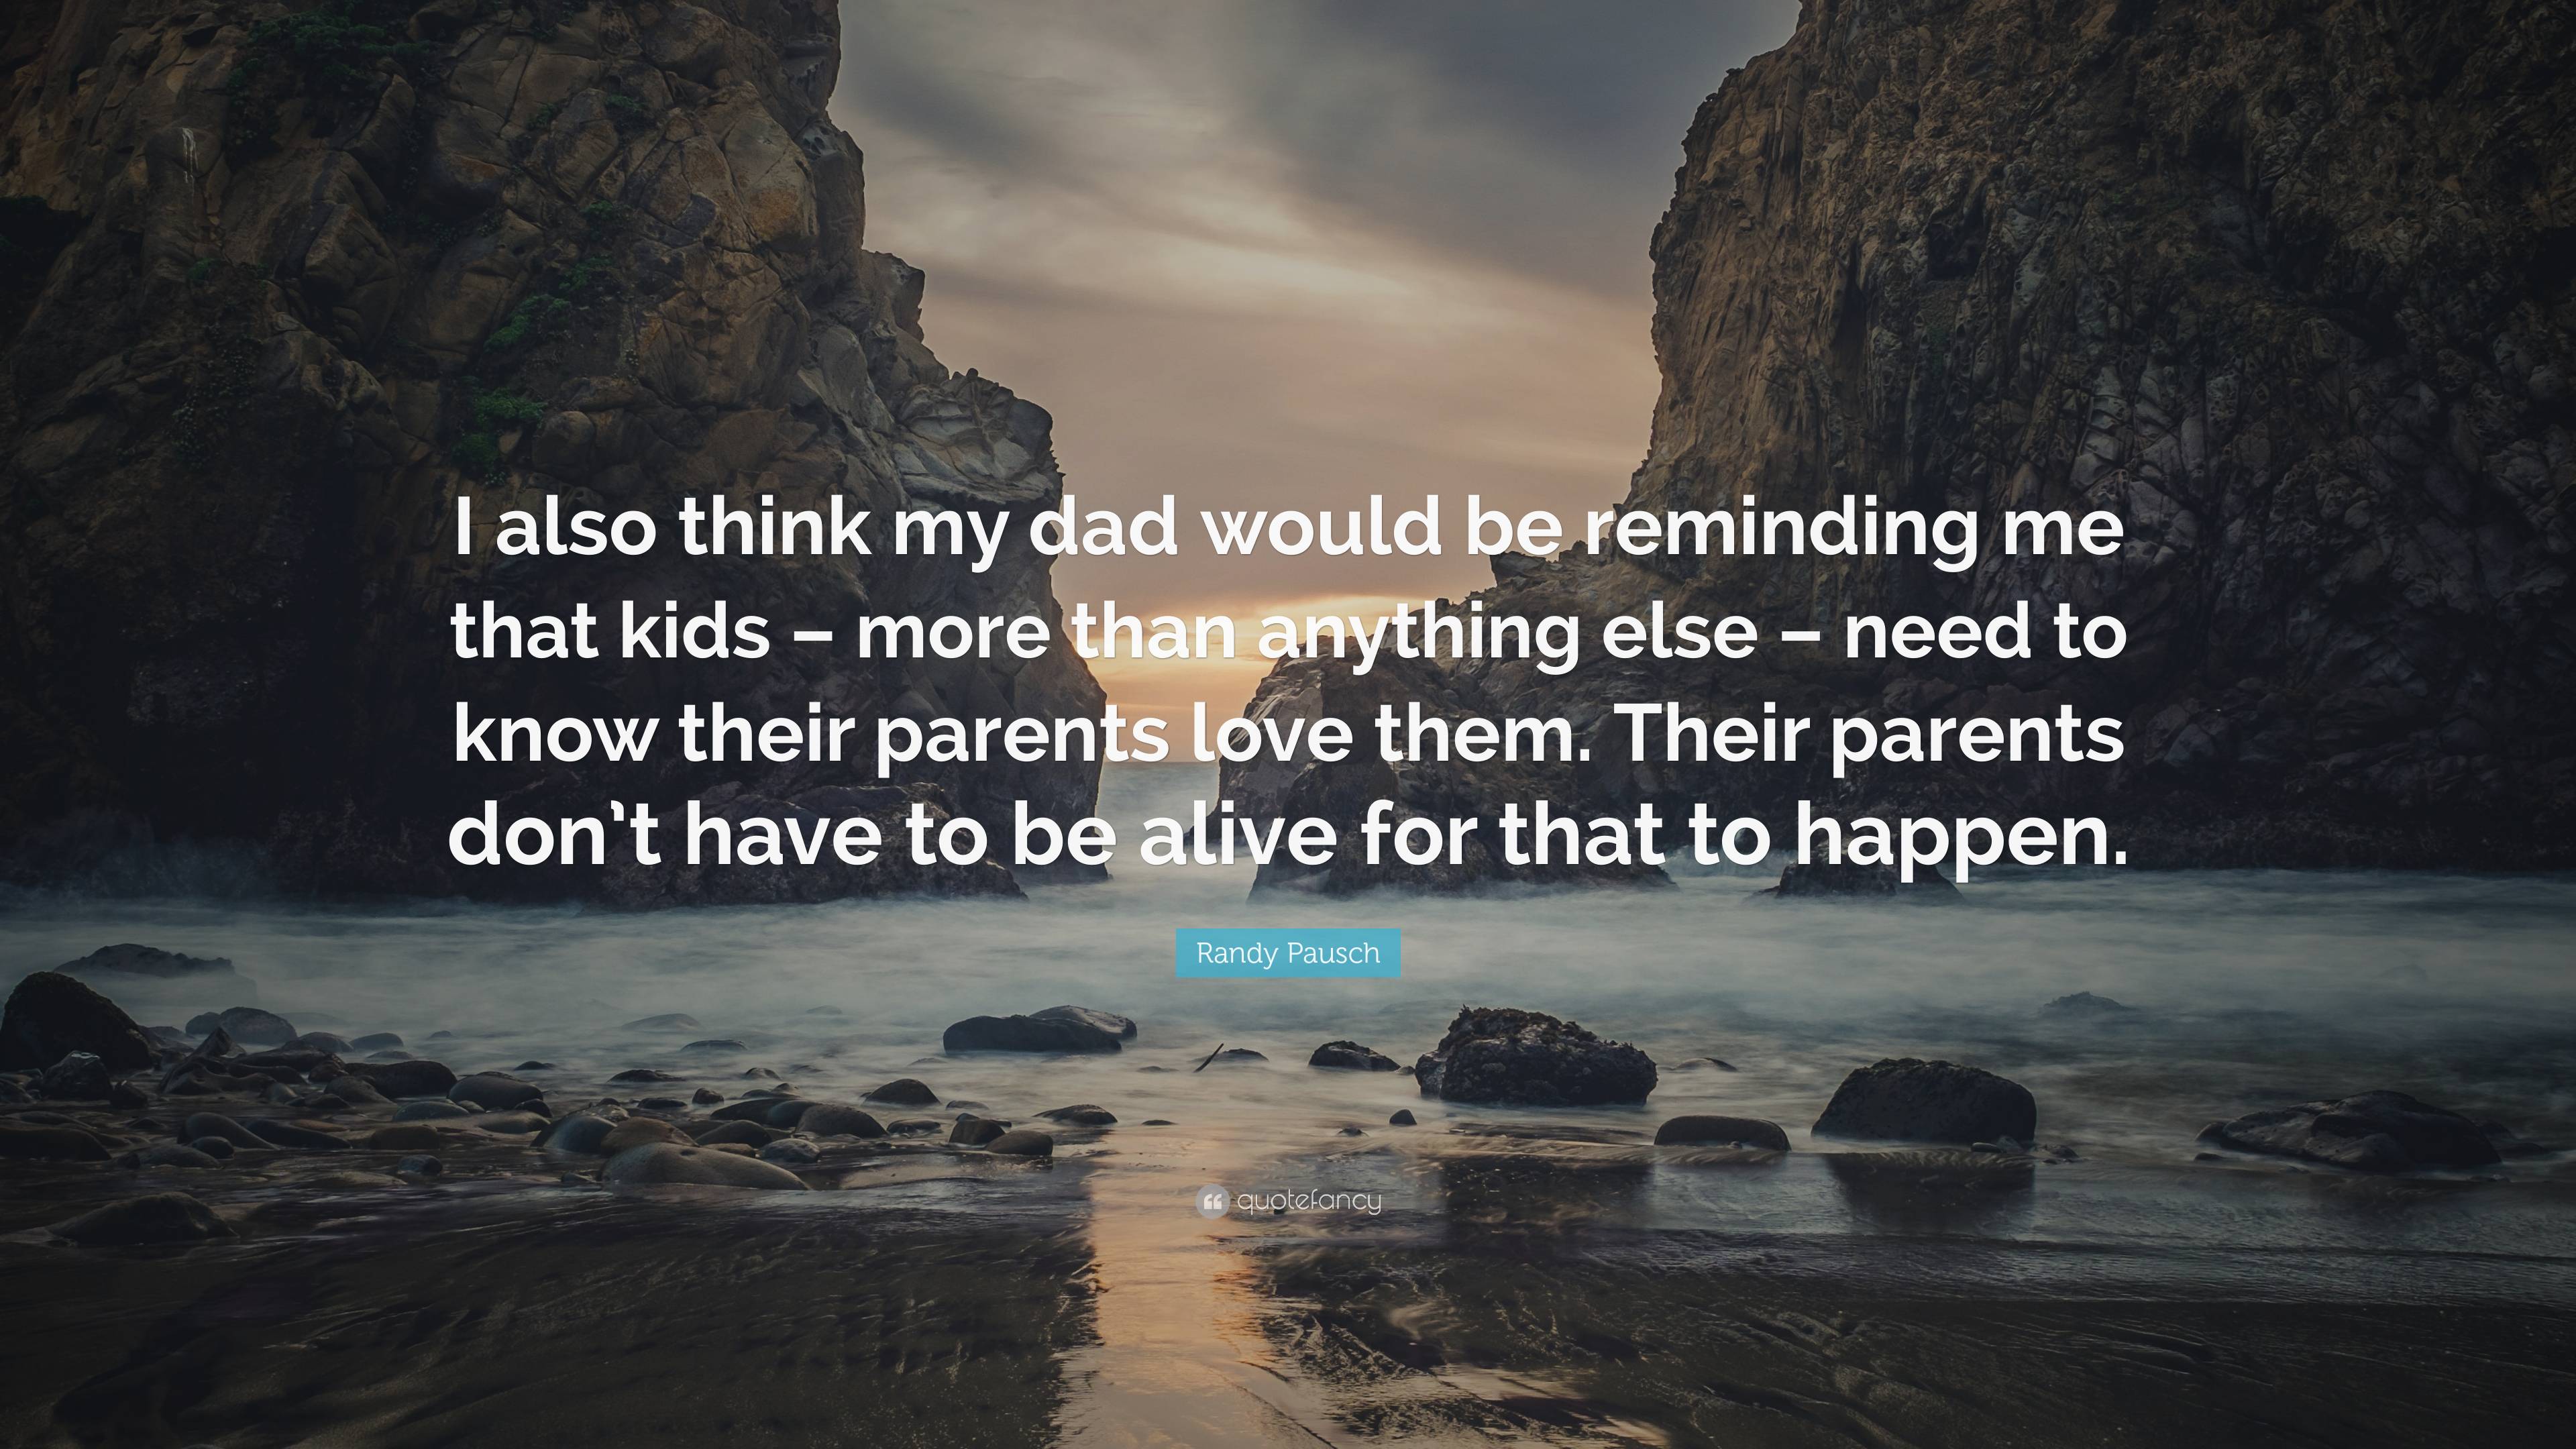 Randy Pausch Quote: “I also think my dad would be reminding me that ...